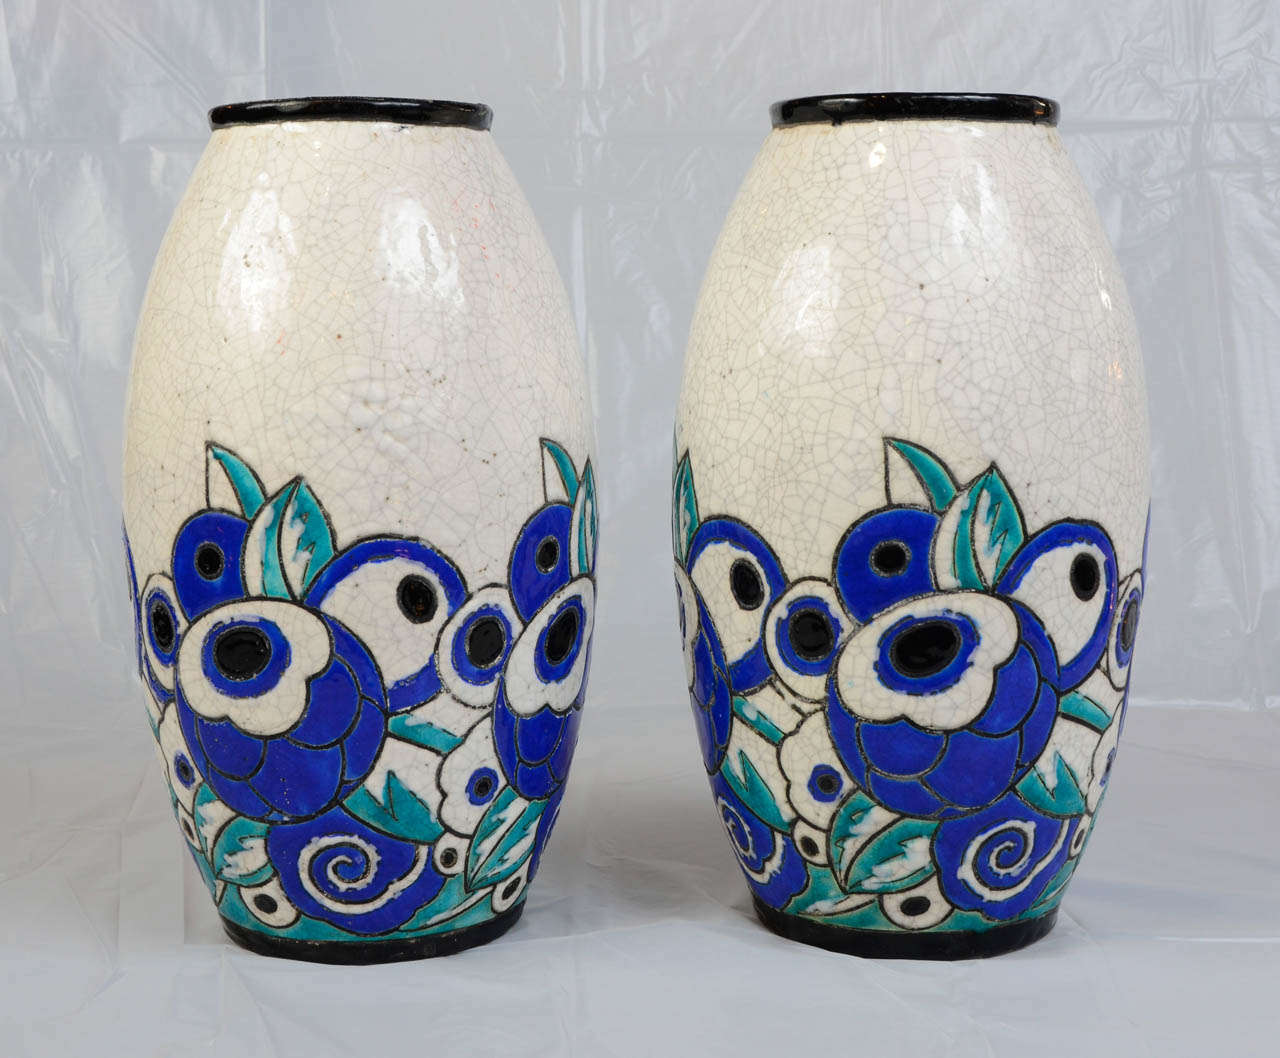 Pair of crackled ceramic vases with enameled flowers. Perfect condition. Signed and numbered. Attributed to Charles Catteau for Boch.